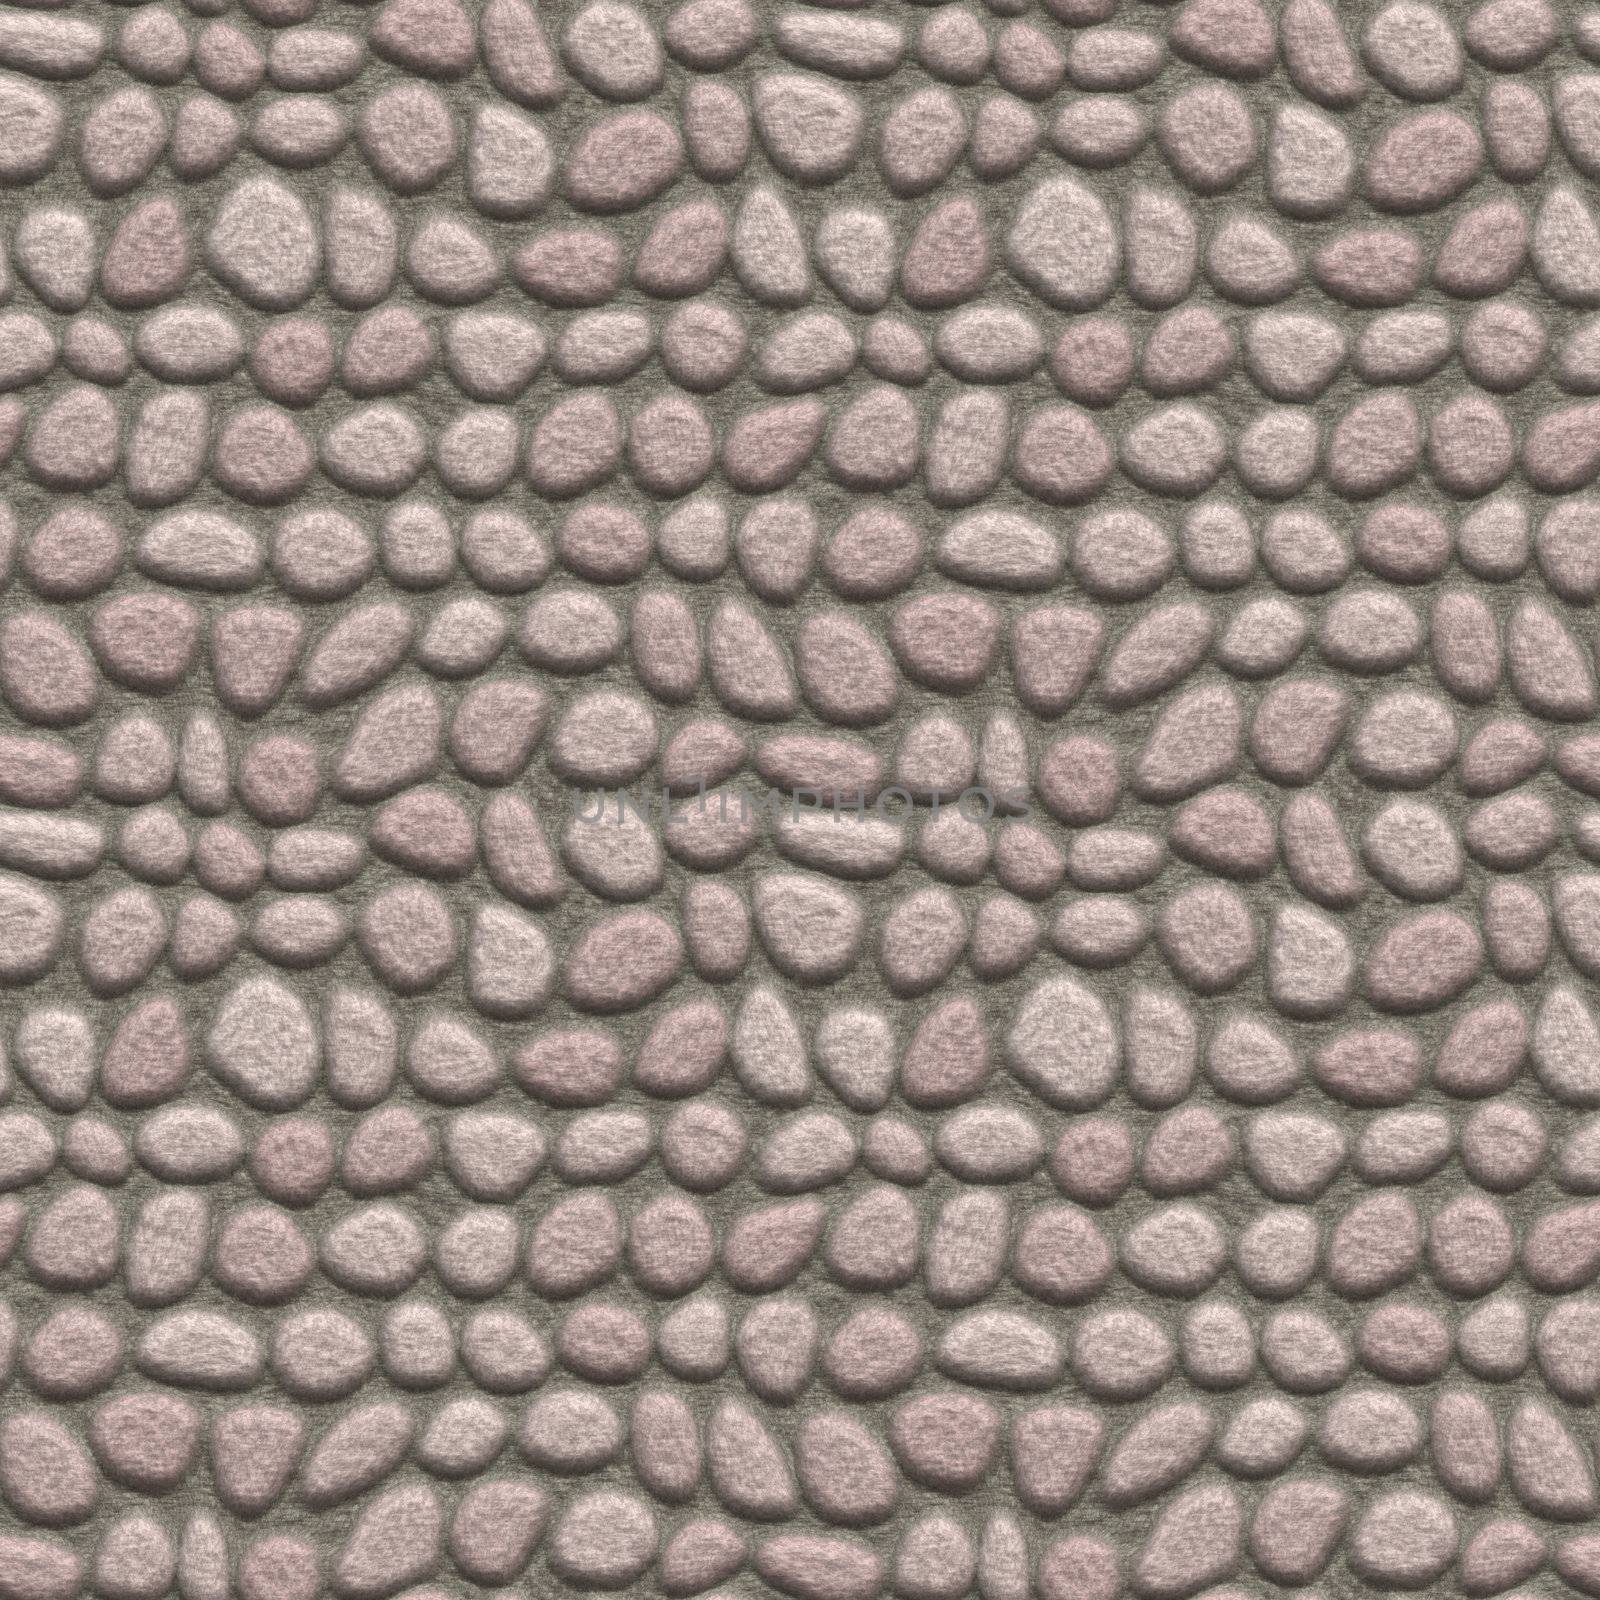 Stone Wall Seamless Pattern by bmelo